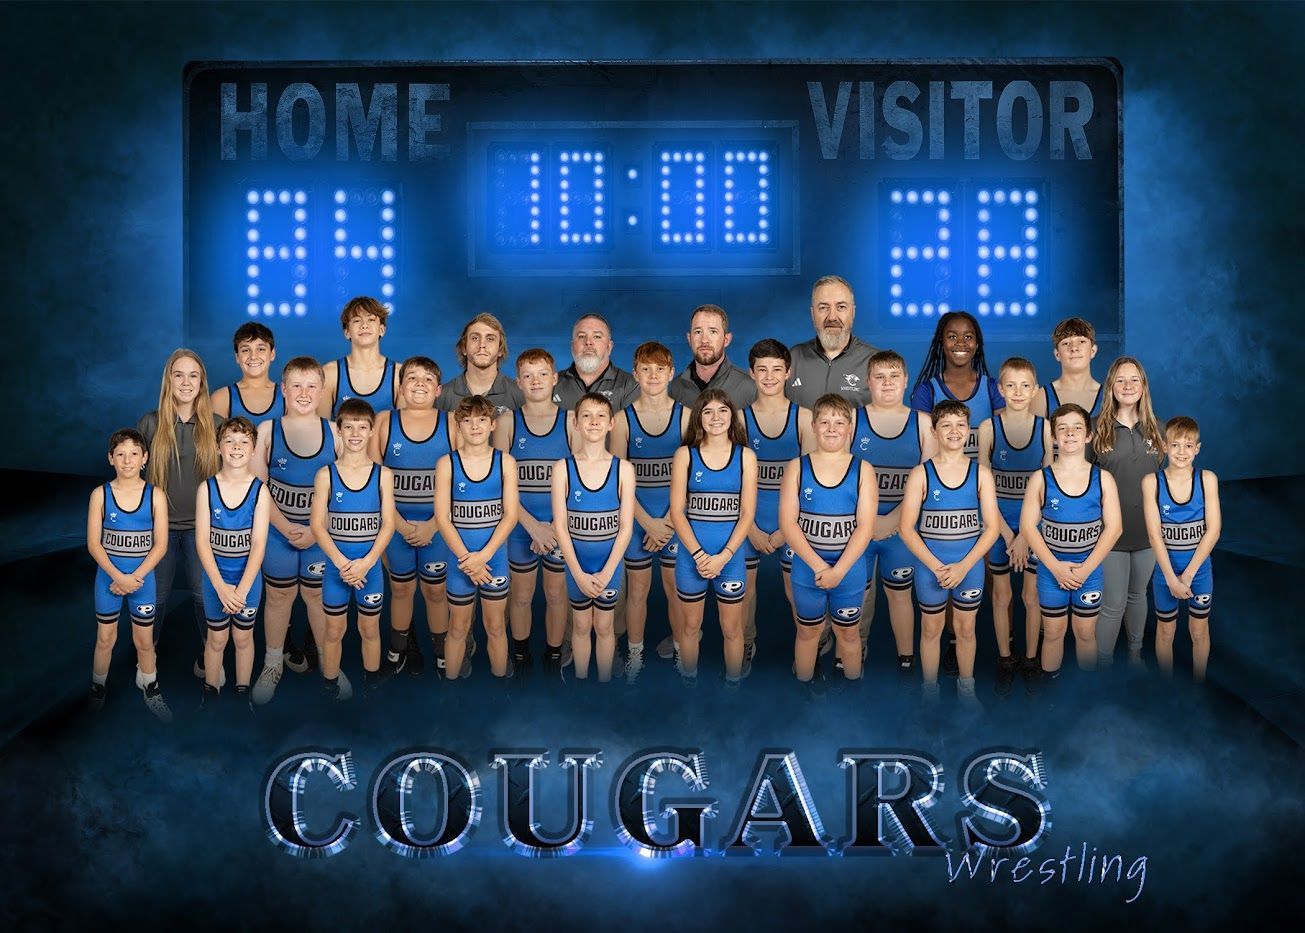 a cougars wrestling team poses for a team photo